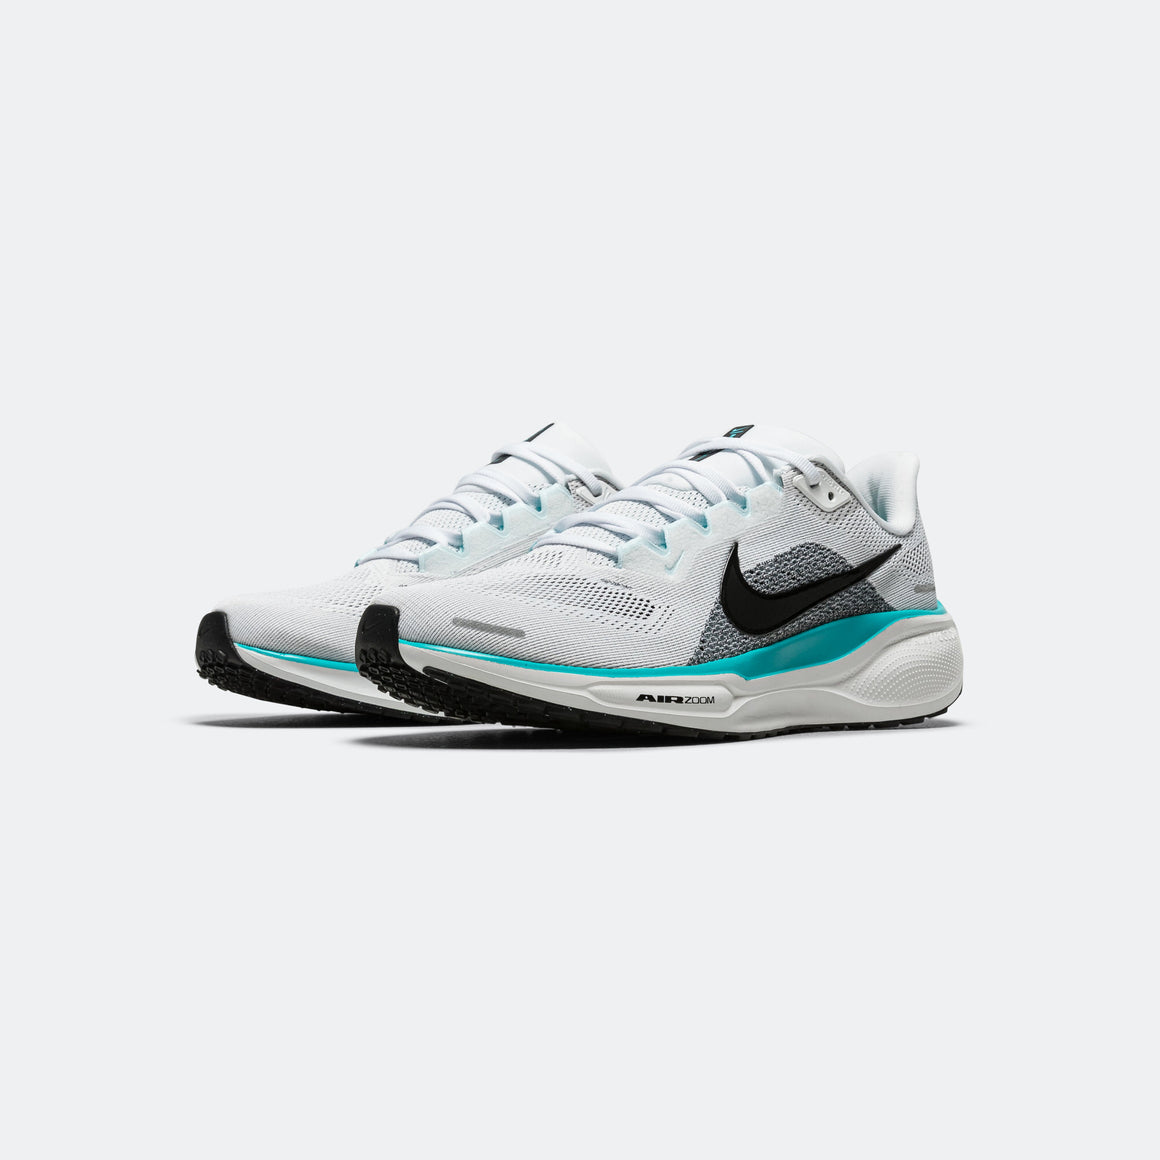 Nike - Mens Air Zoom Pegasus 41 - White/Black - Dusty Cactus - Up There Athletics